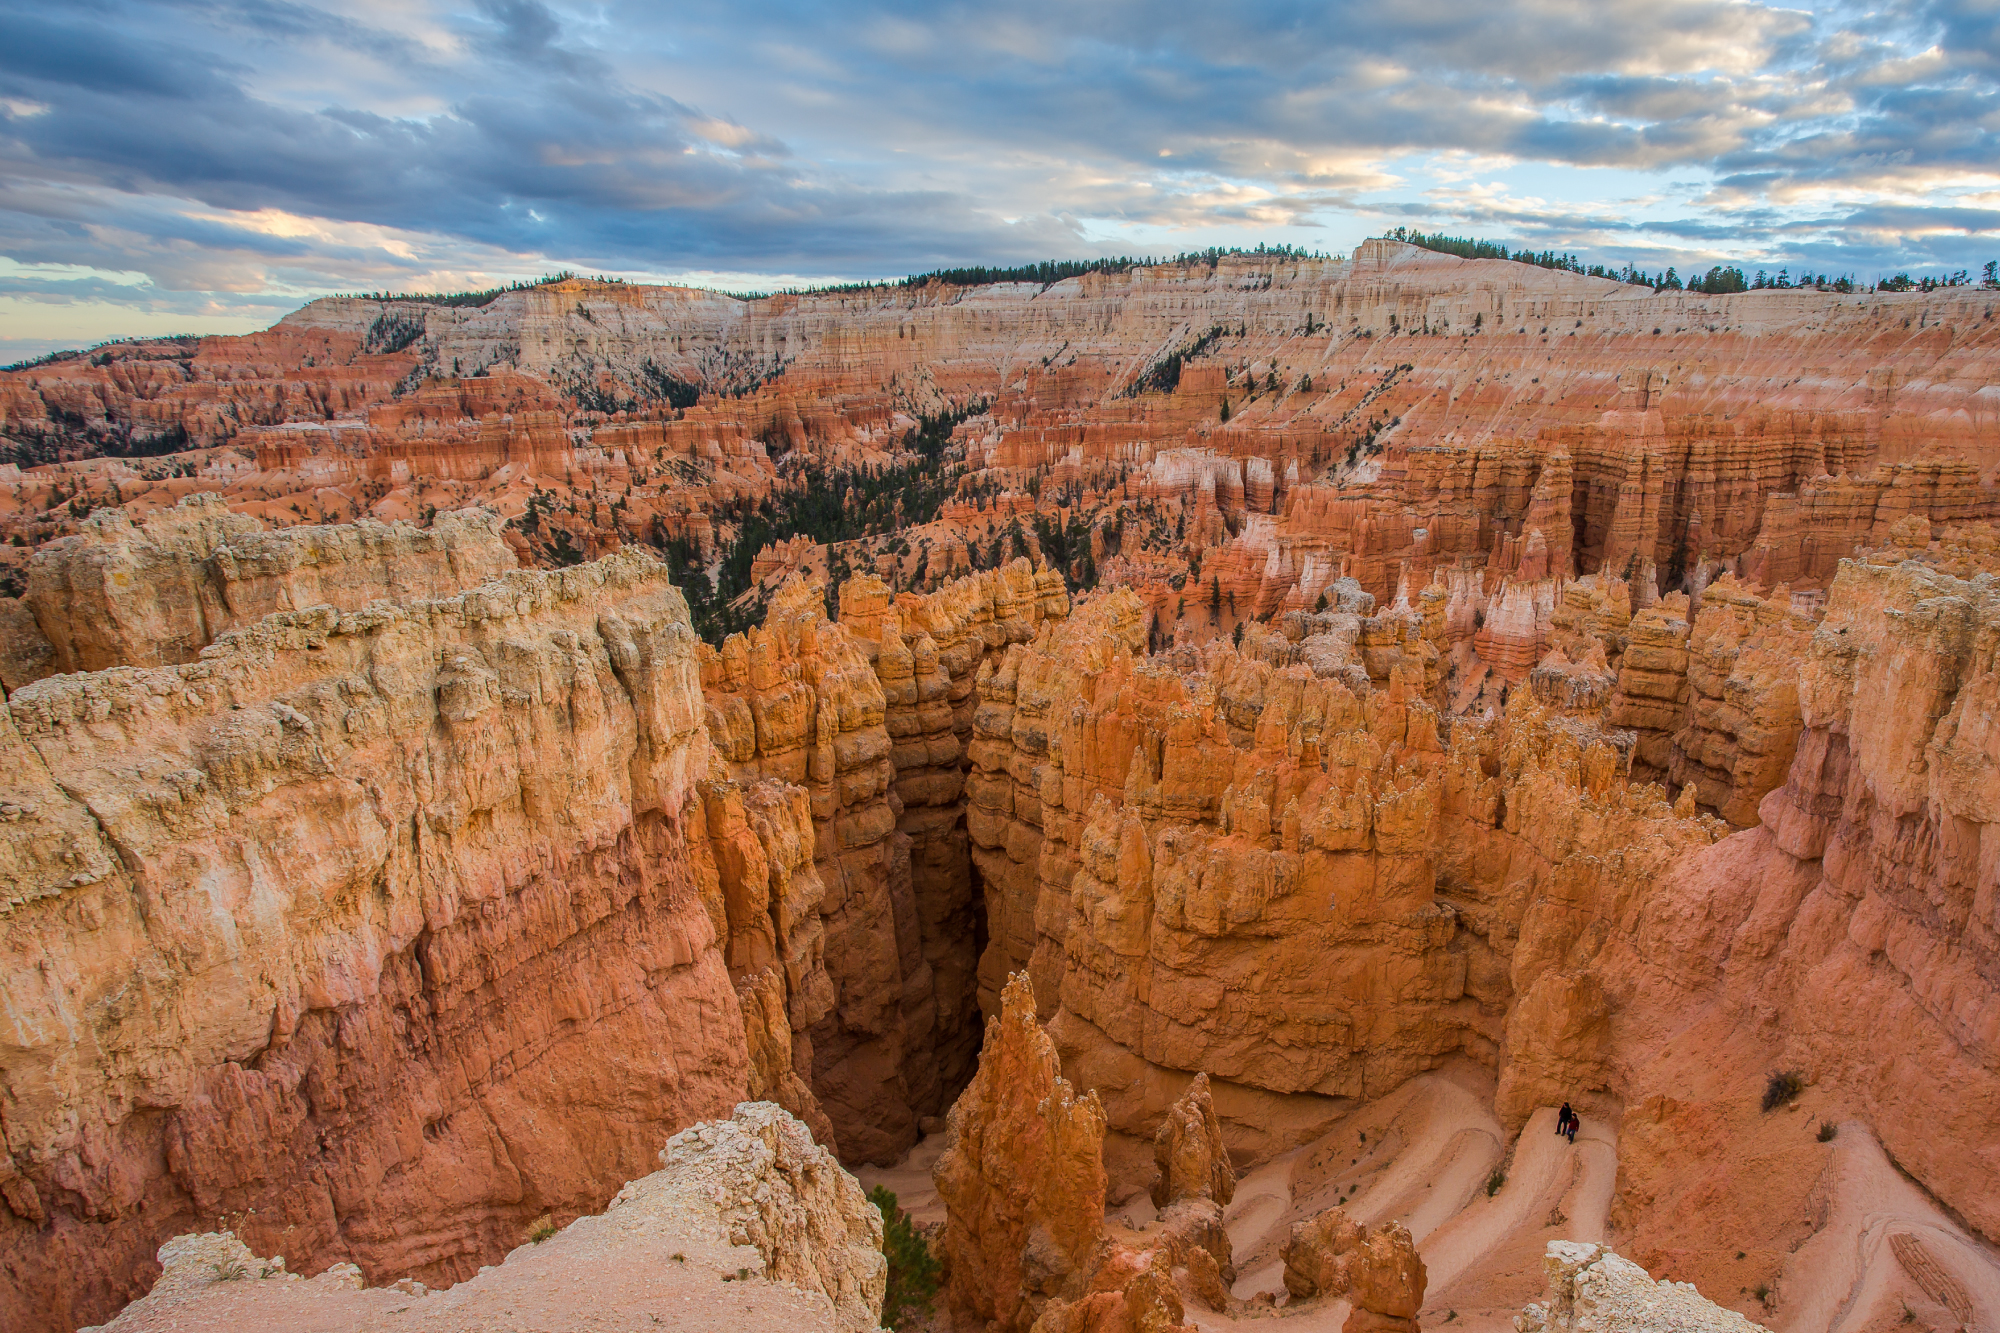 HDR Photography Workshop: Bryce Canyon HDR | Pt.4 | RAW Processing and Photoshop Import